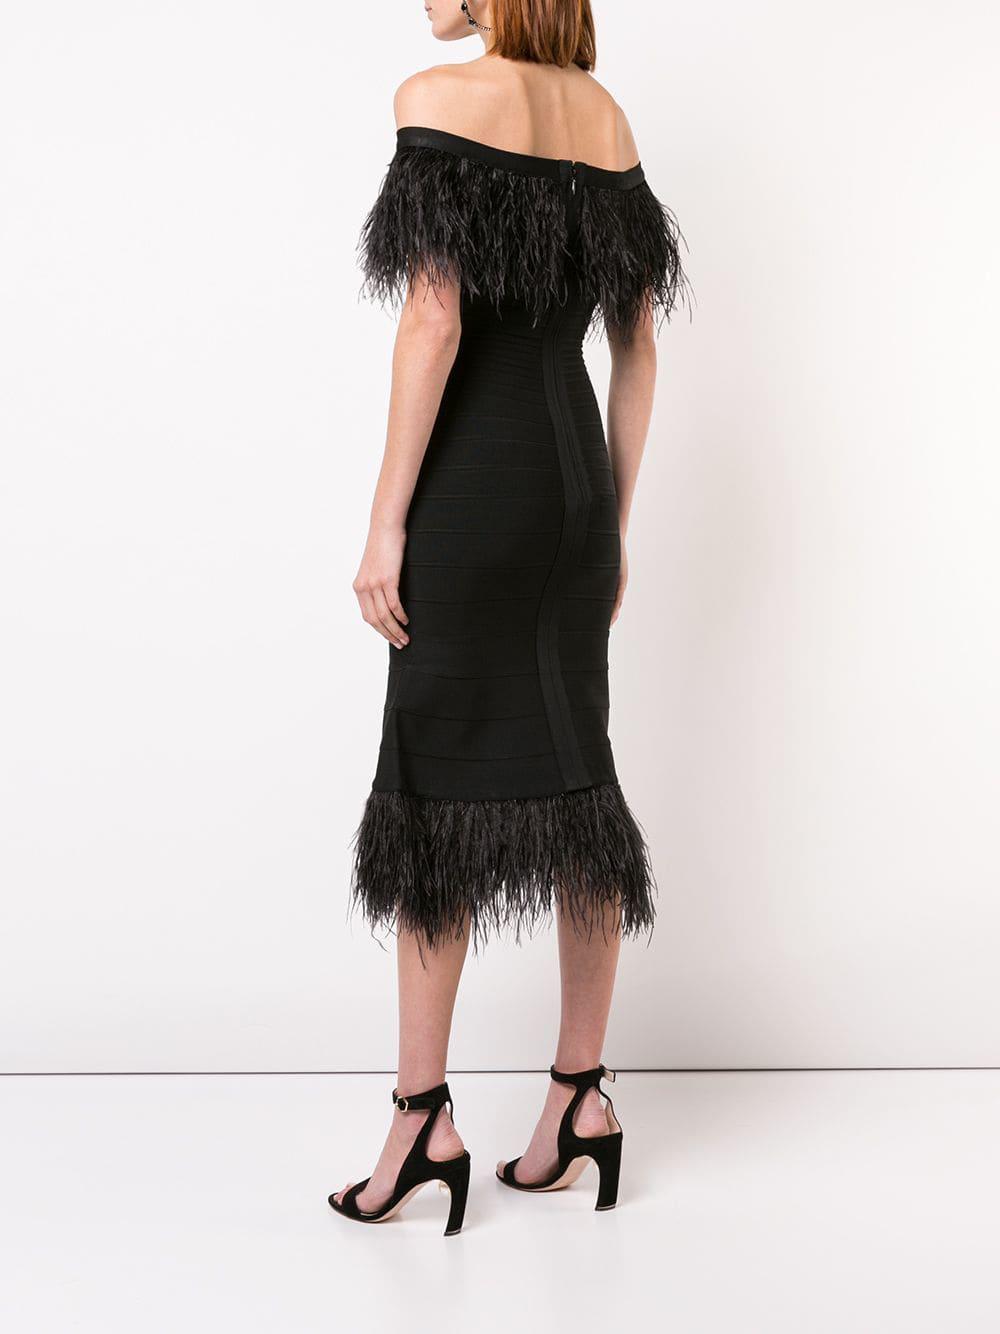 Hervé Léger Synthetic Ostrich Feather Trim Bandage Dress in Black - Lyst